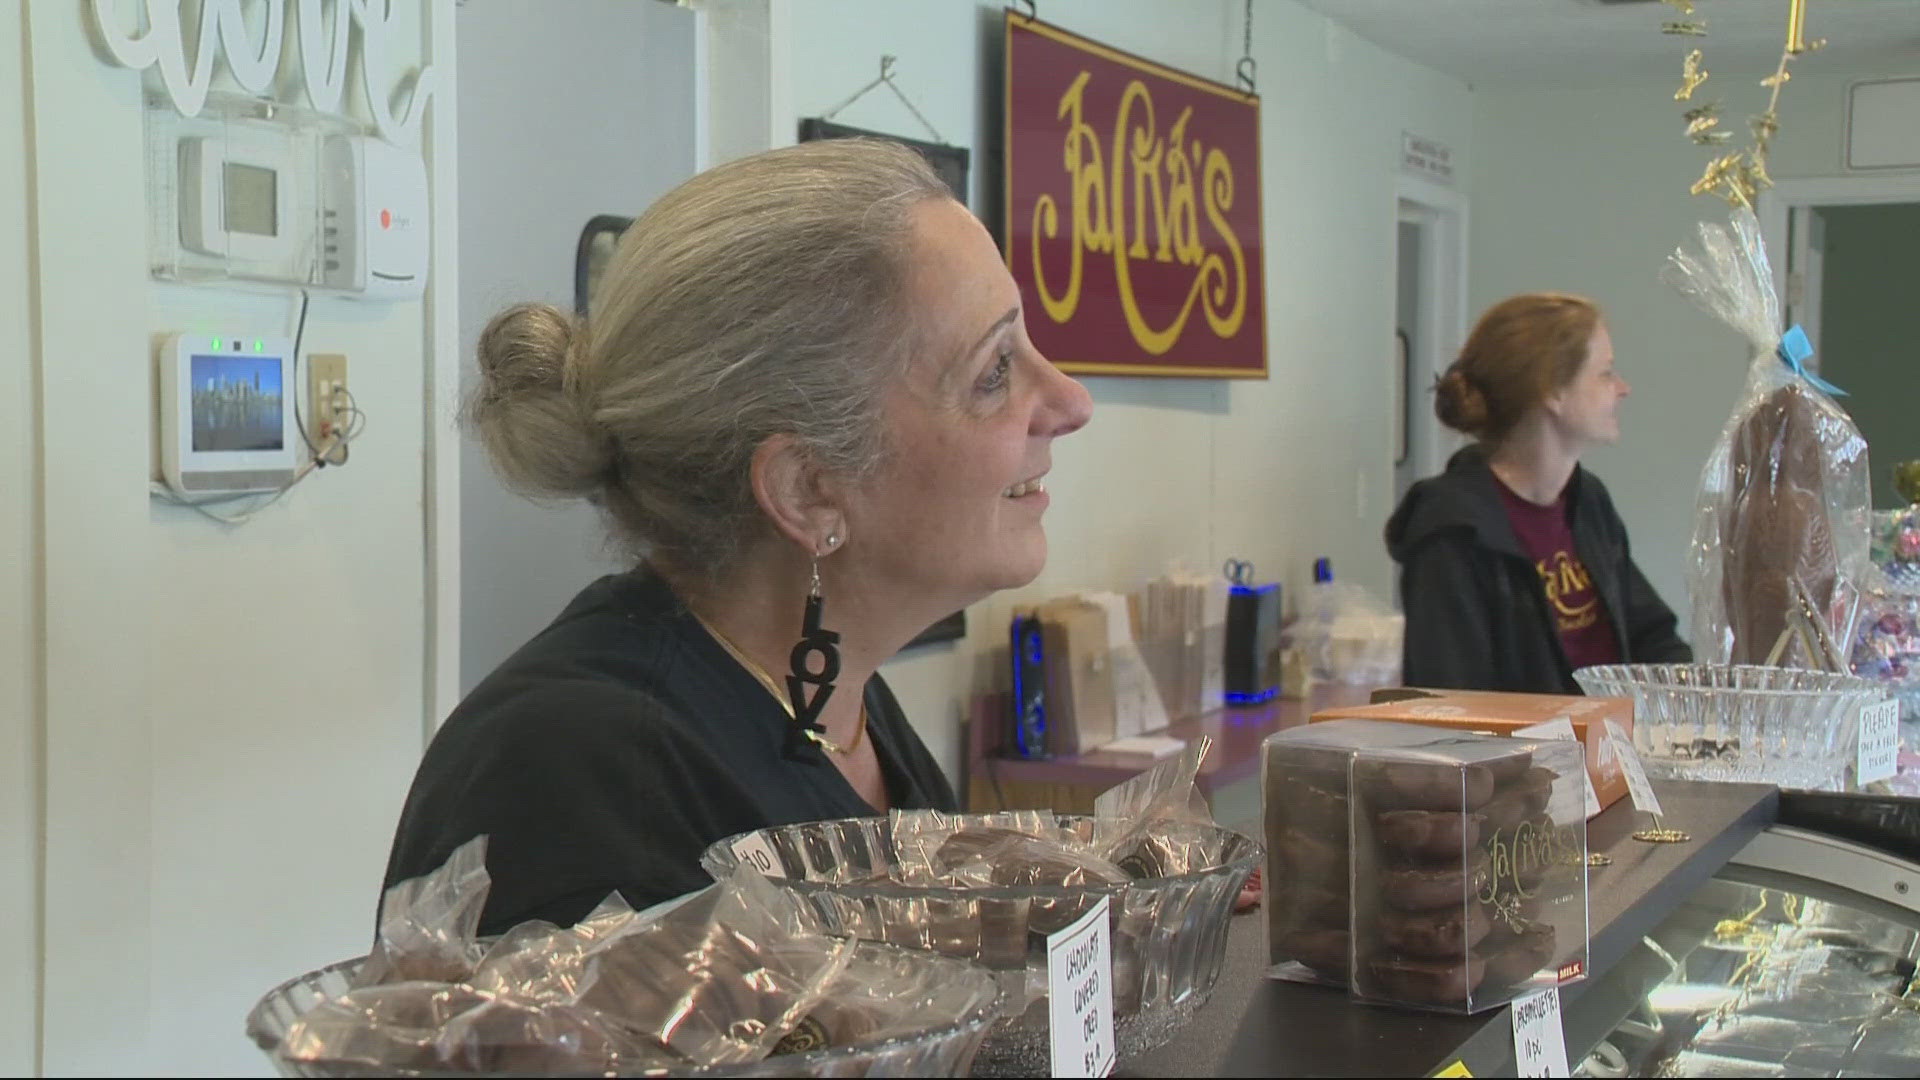 JaCiva's Bakery & Chocolatier closed its doors after nearly 40 years of business.